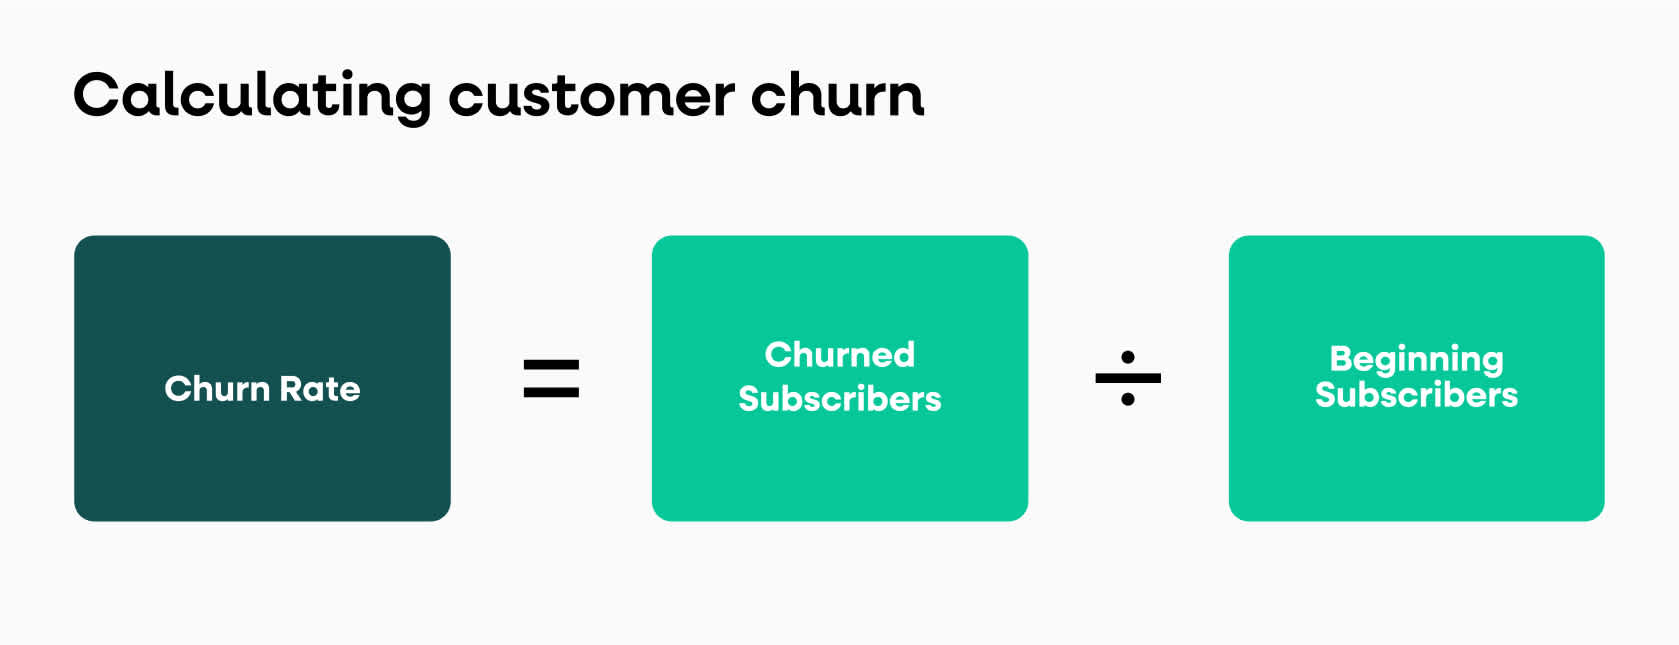 customer churn rate calculation graphic